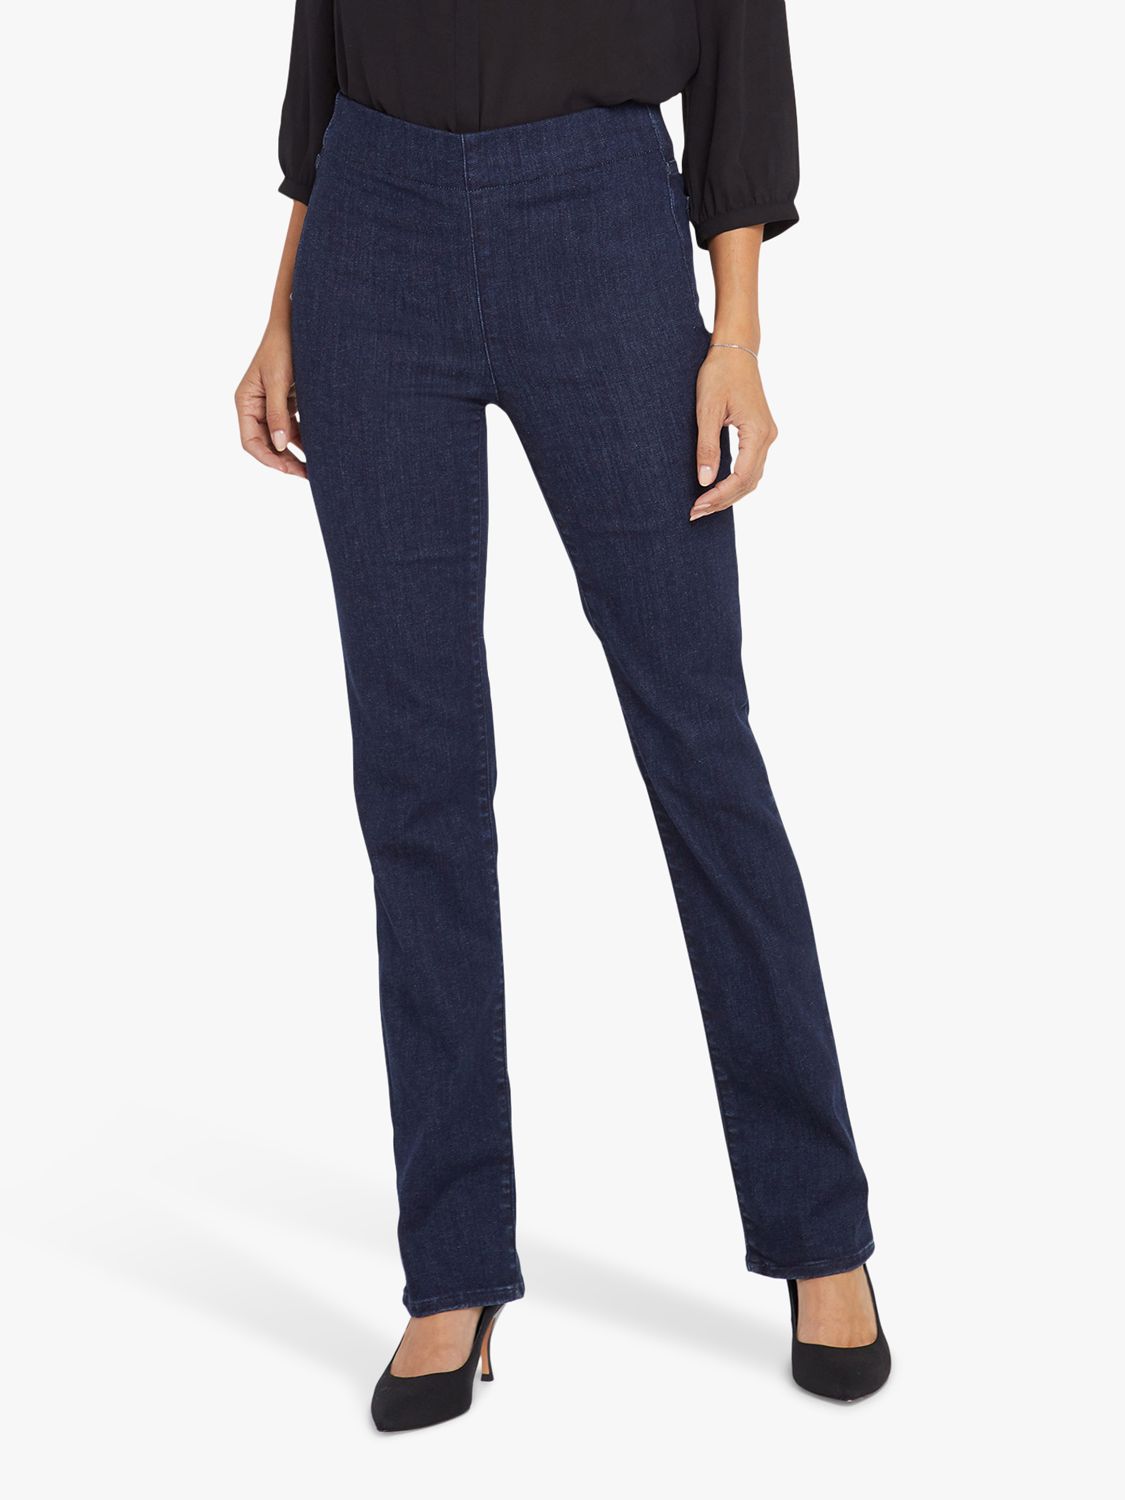 NYDJ Marilyn Straight Pull-On Jeans in SpanSpring™ Denim, Langley at ...